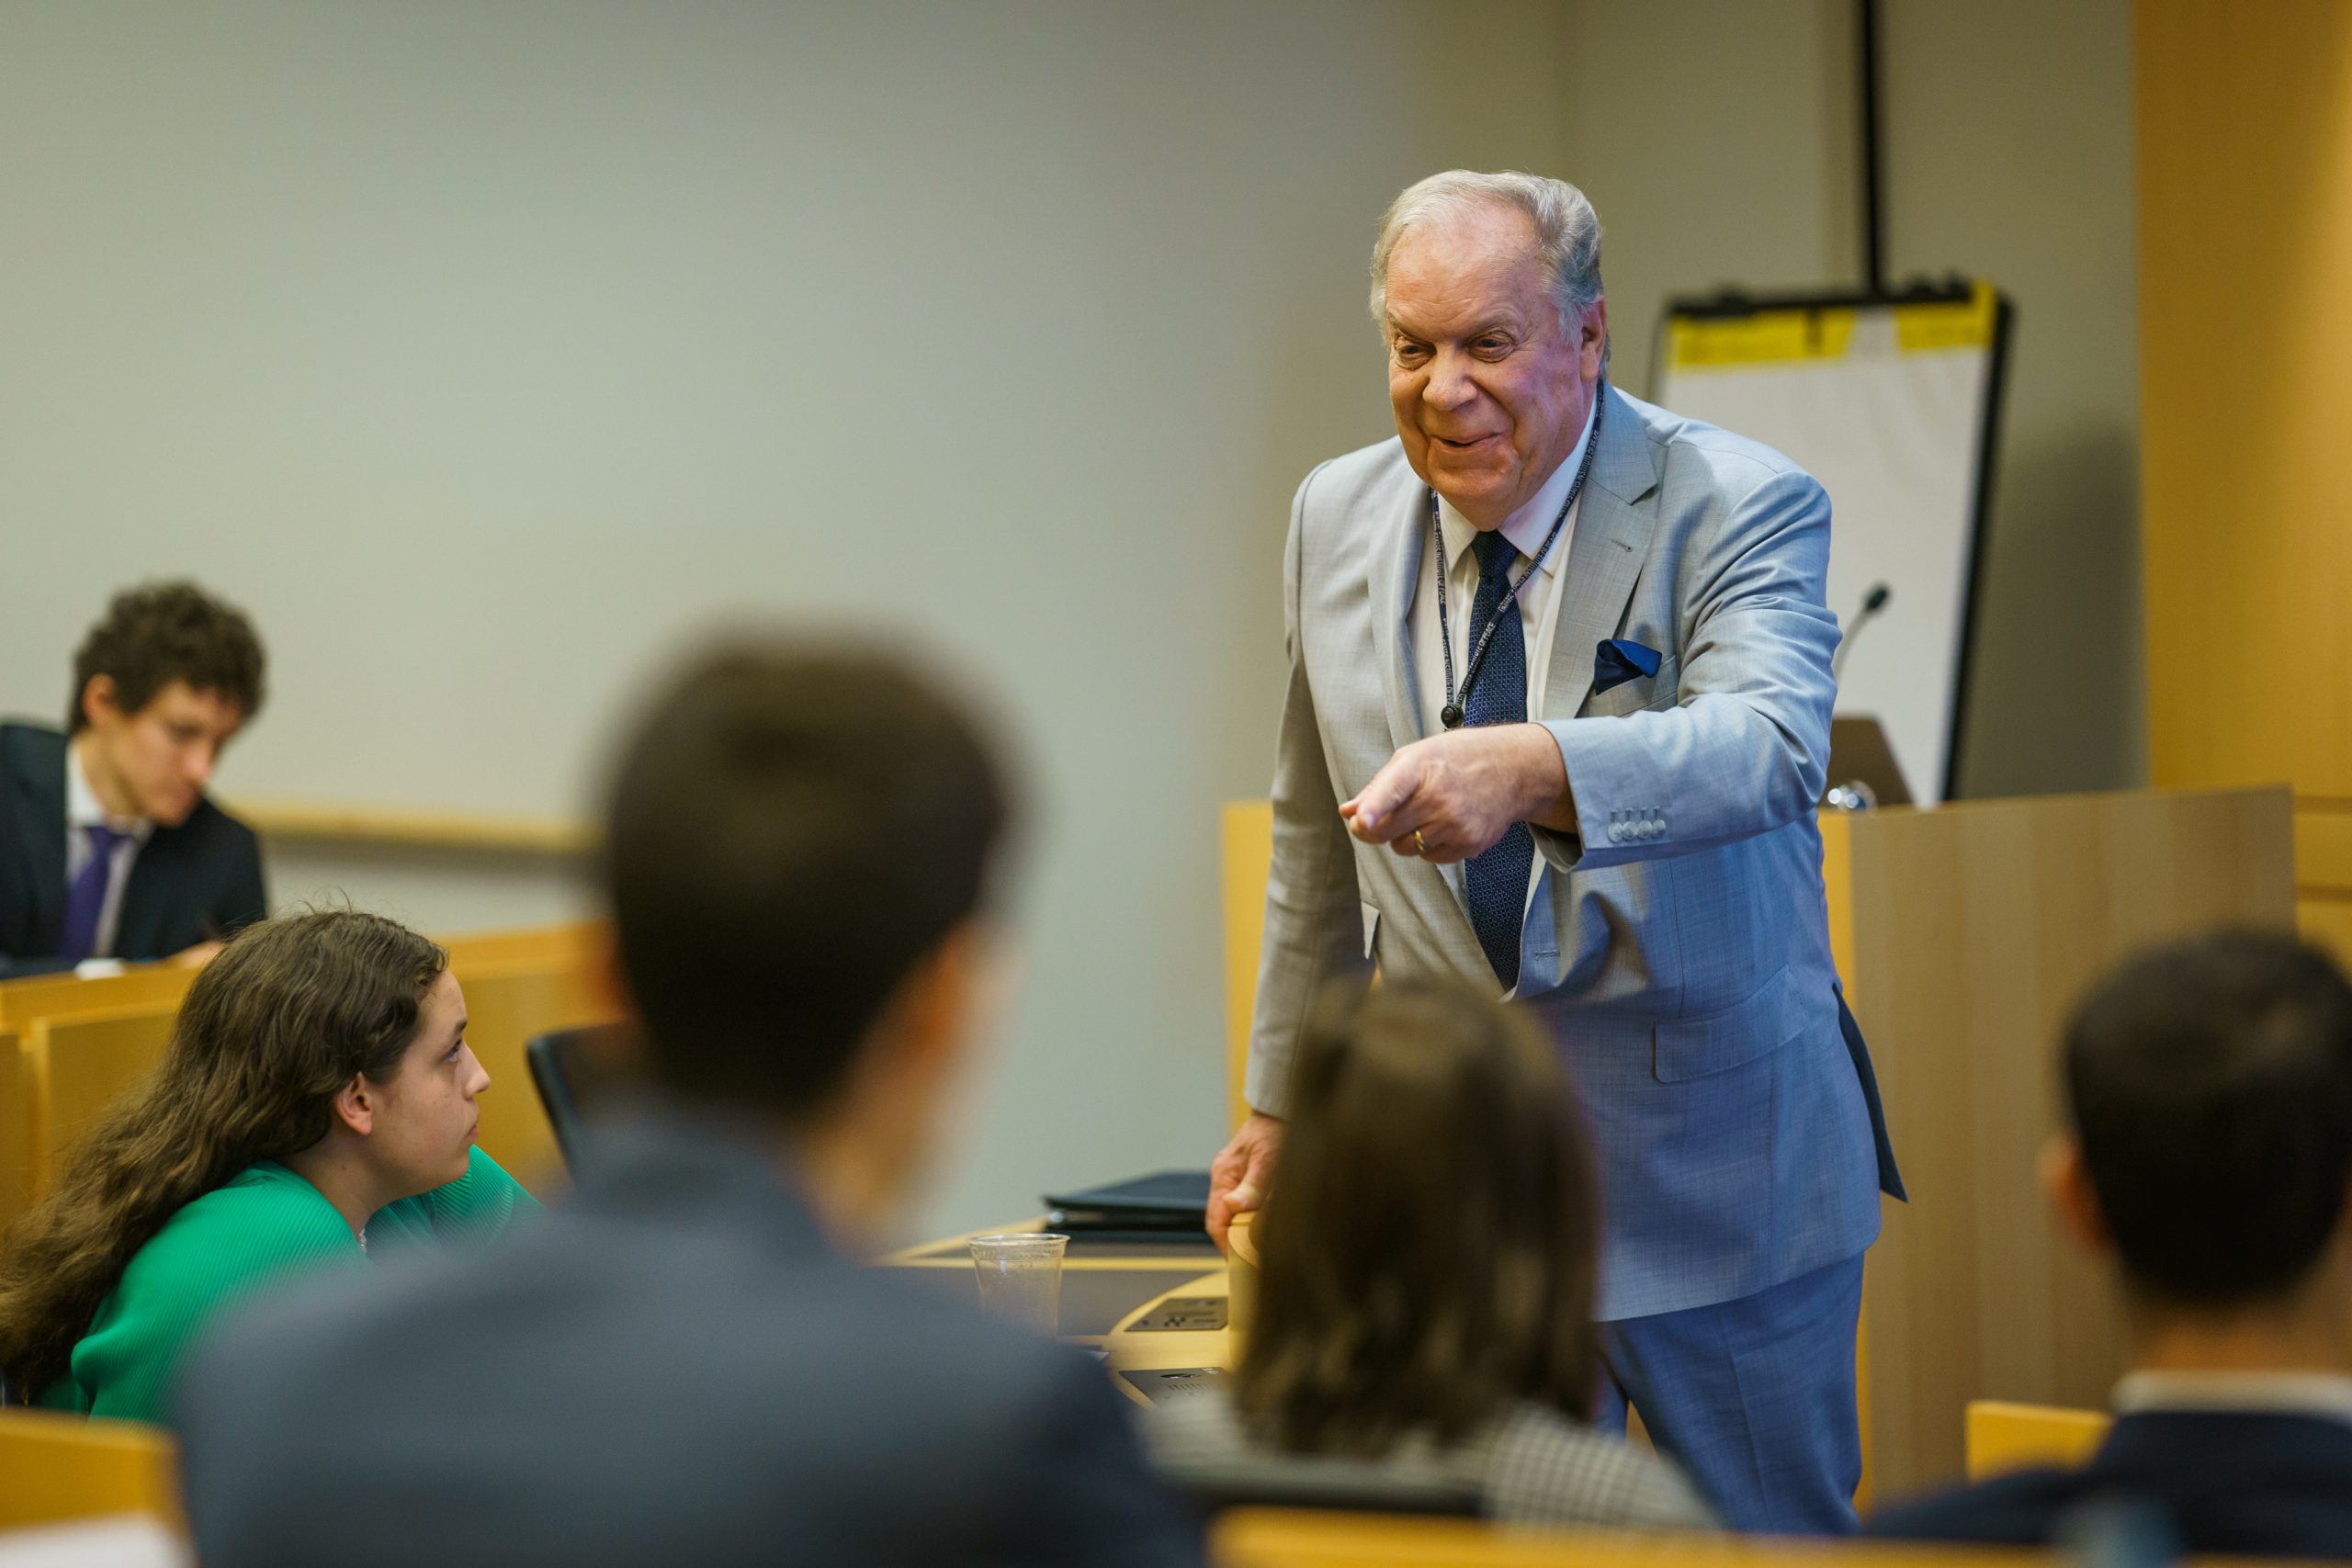 During a visit to USIP, students heard insights from Donald N. Jensen, director for Russia and Europe at USIP, who discussed the Russia-Ukraine war and the challenges of negotiating peace.